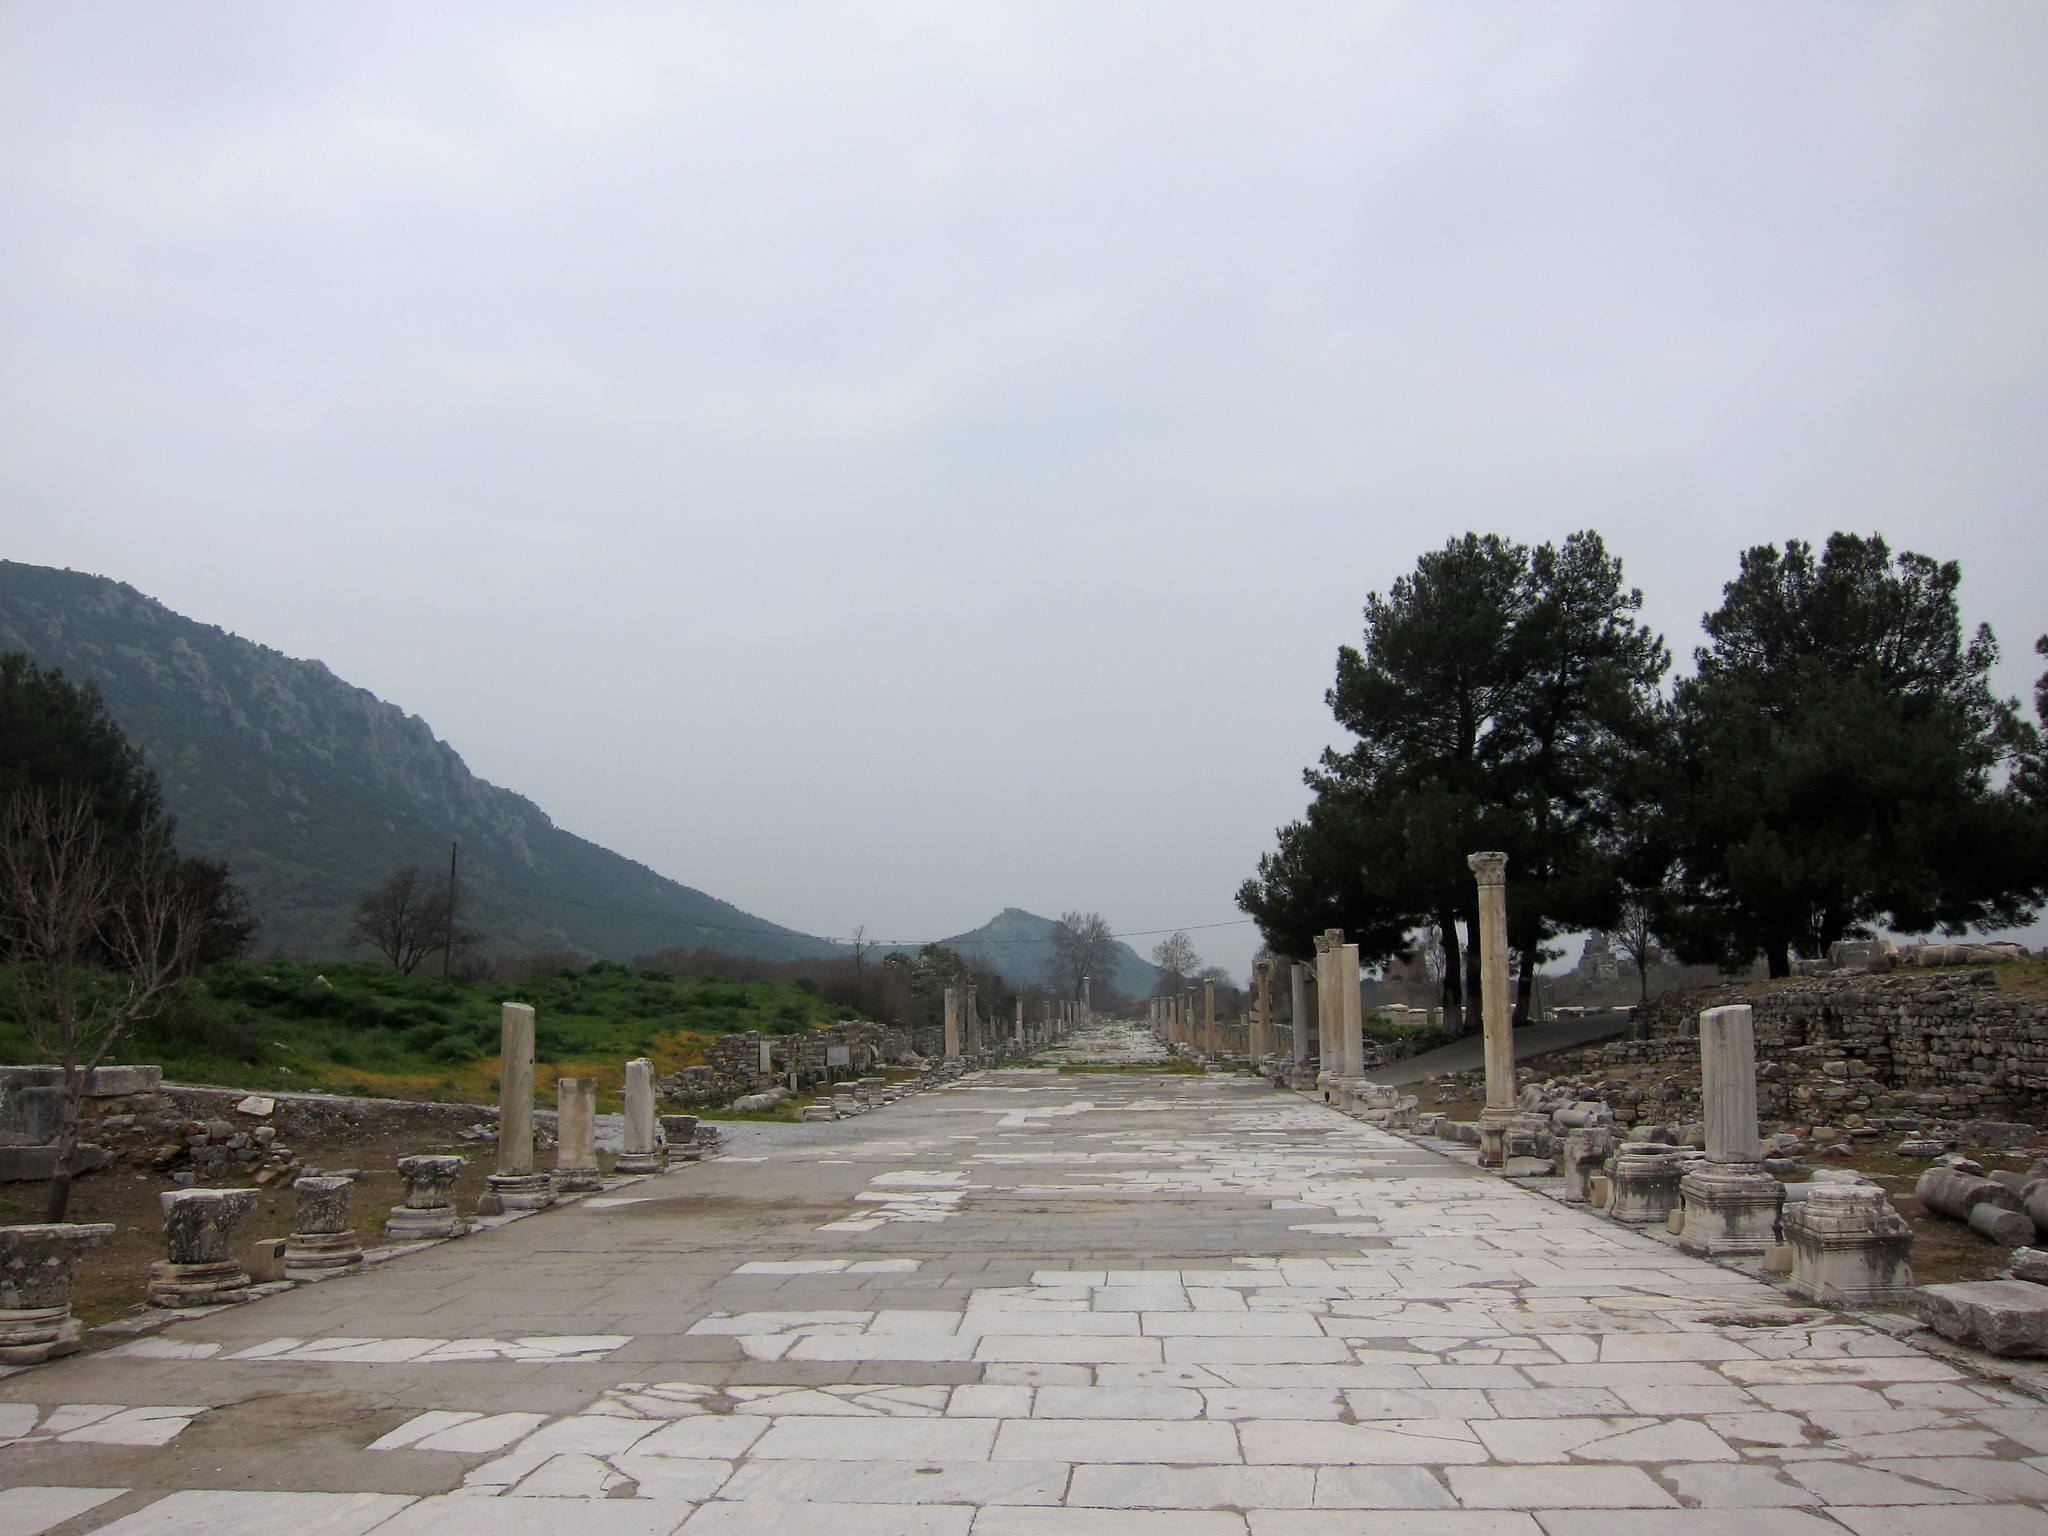 Travel Guide to the Ancient City of Ephesus, Turkey